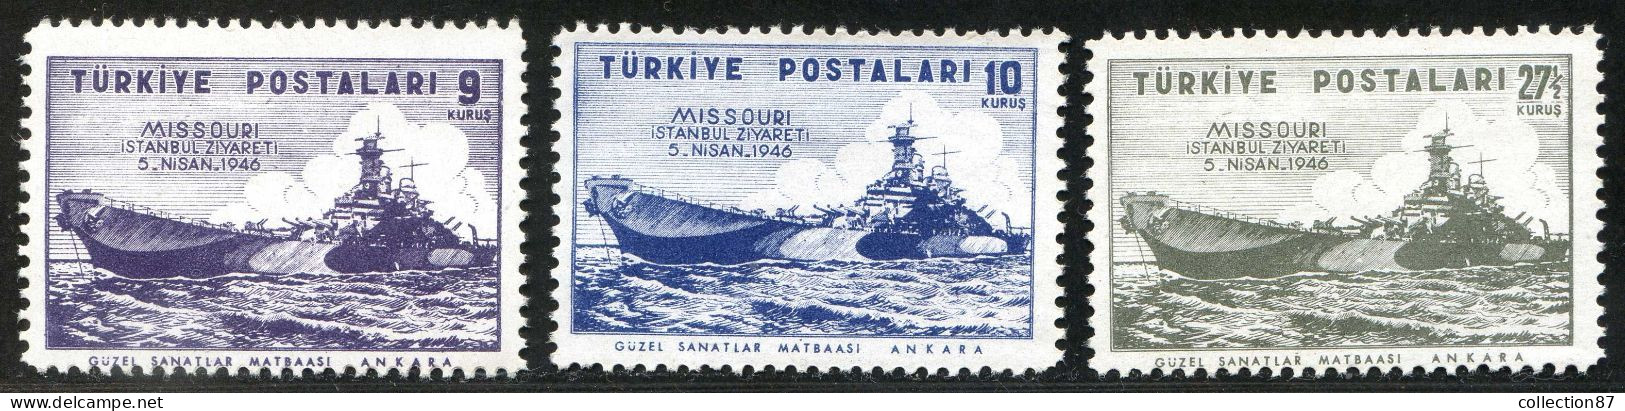 REF 091 > TURQUIE < Yv N° 1037 à 1039 * * < Neuf Luxe Dos Visible MNH * * - Turkey - Unused Stamps